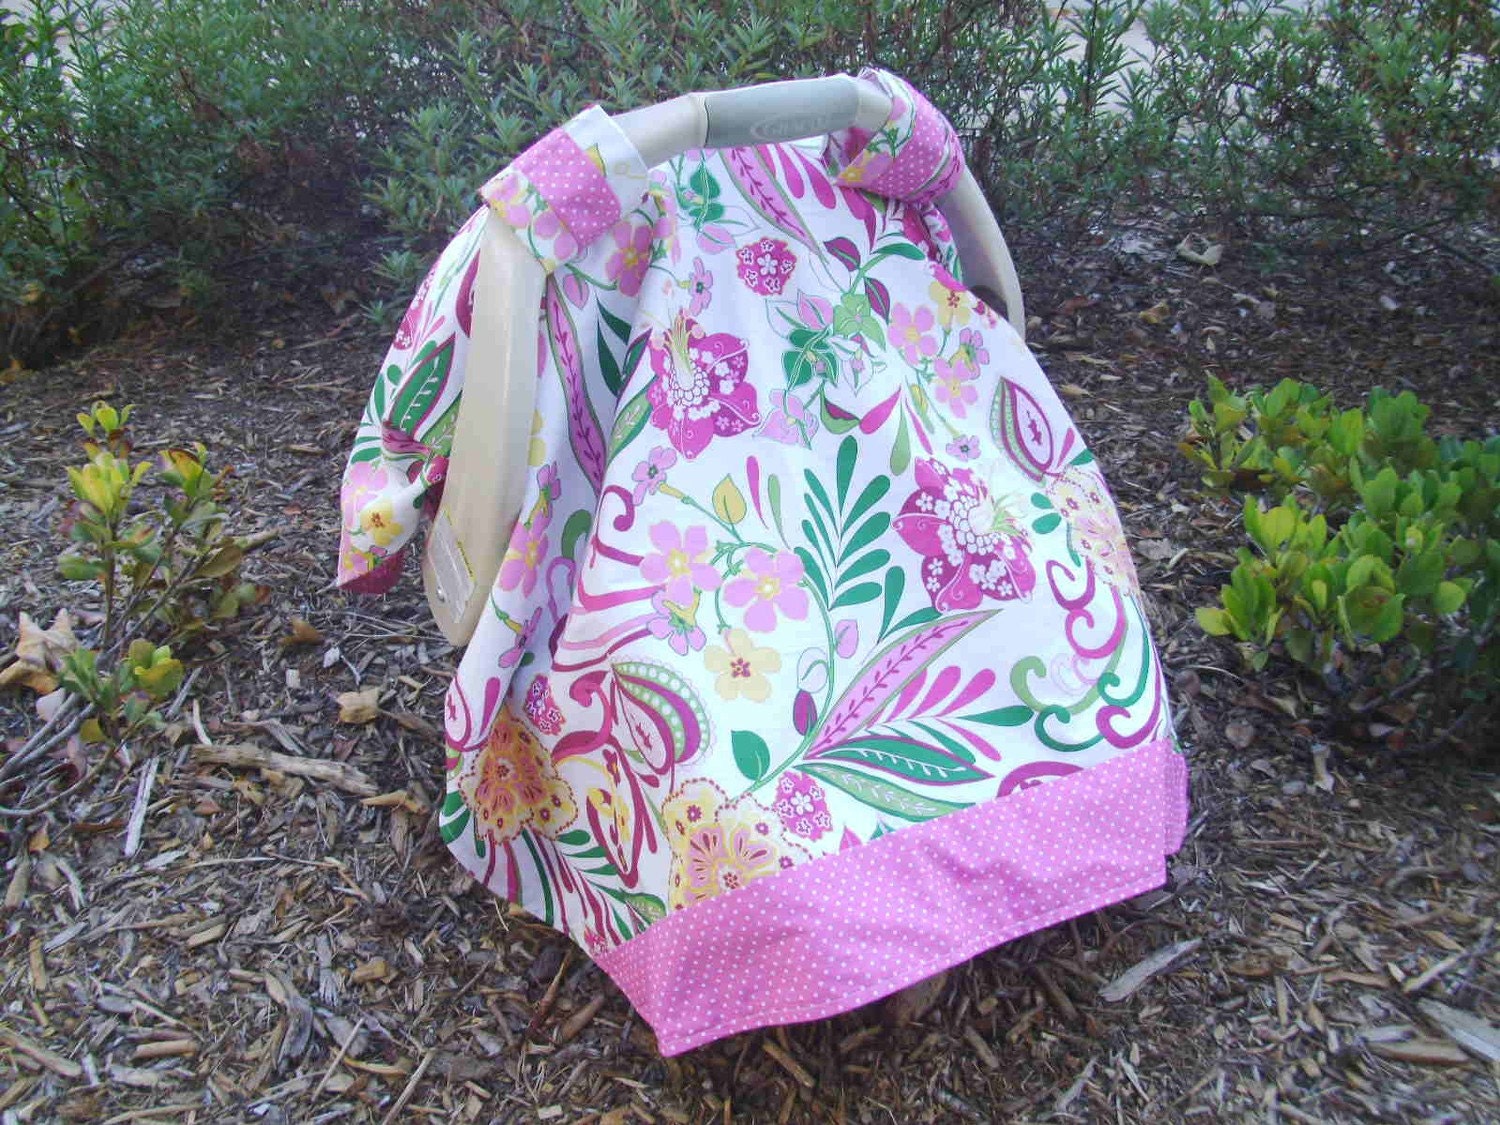 Car Seat Cover/Canopy in a pink, green and yellow floral fabric includes FREE SHIPPING